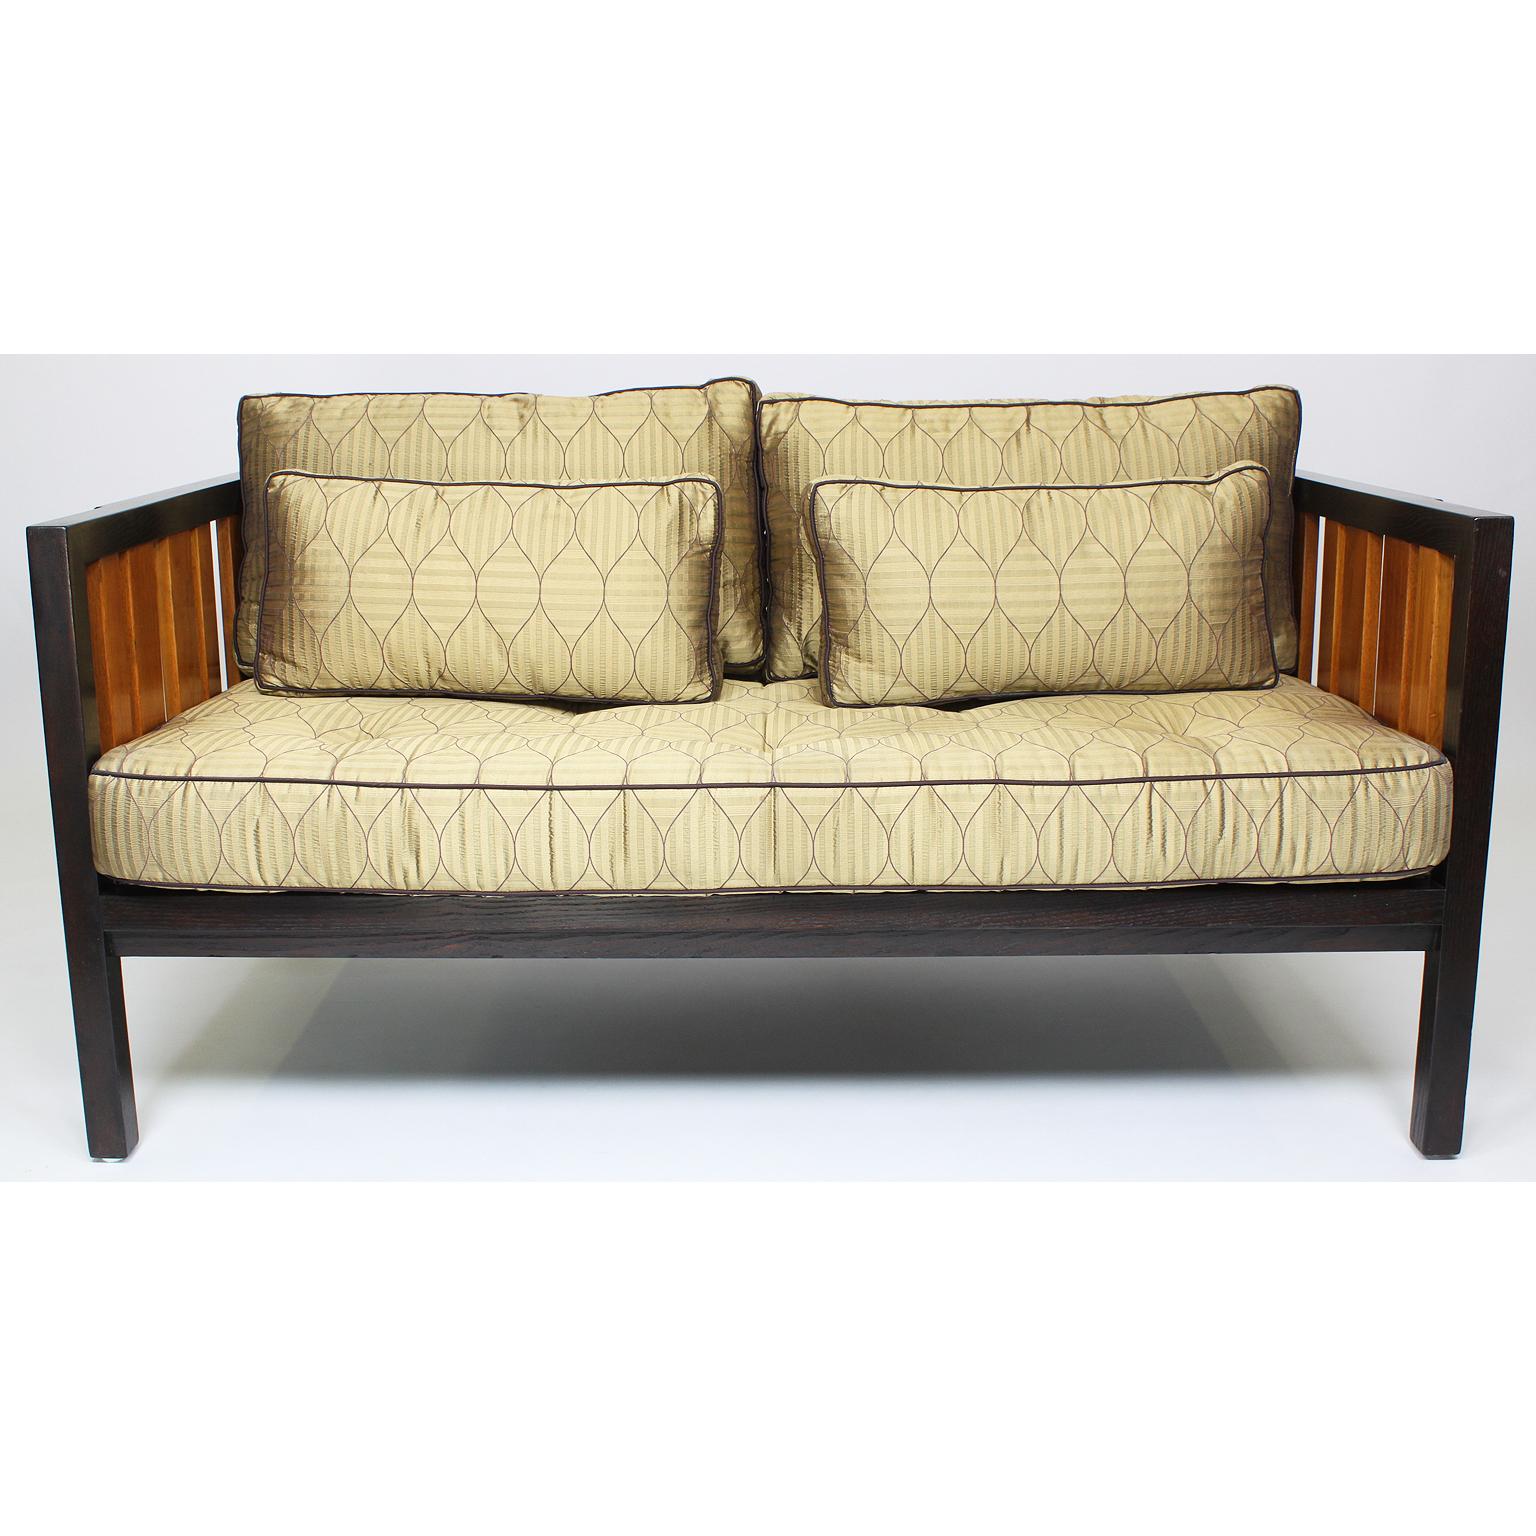 A fine and rare mahogany and ash loveseat, settee designed by Edward Wormley for Dunbar. The rectangular frame with grill ash wood panels and an 